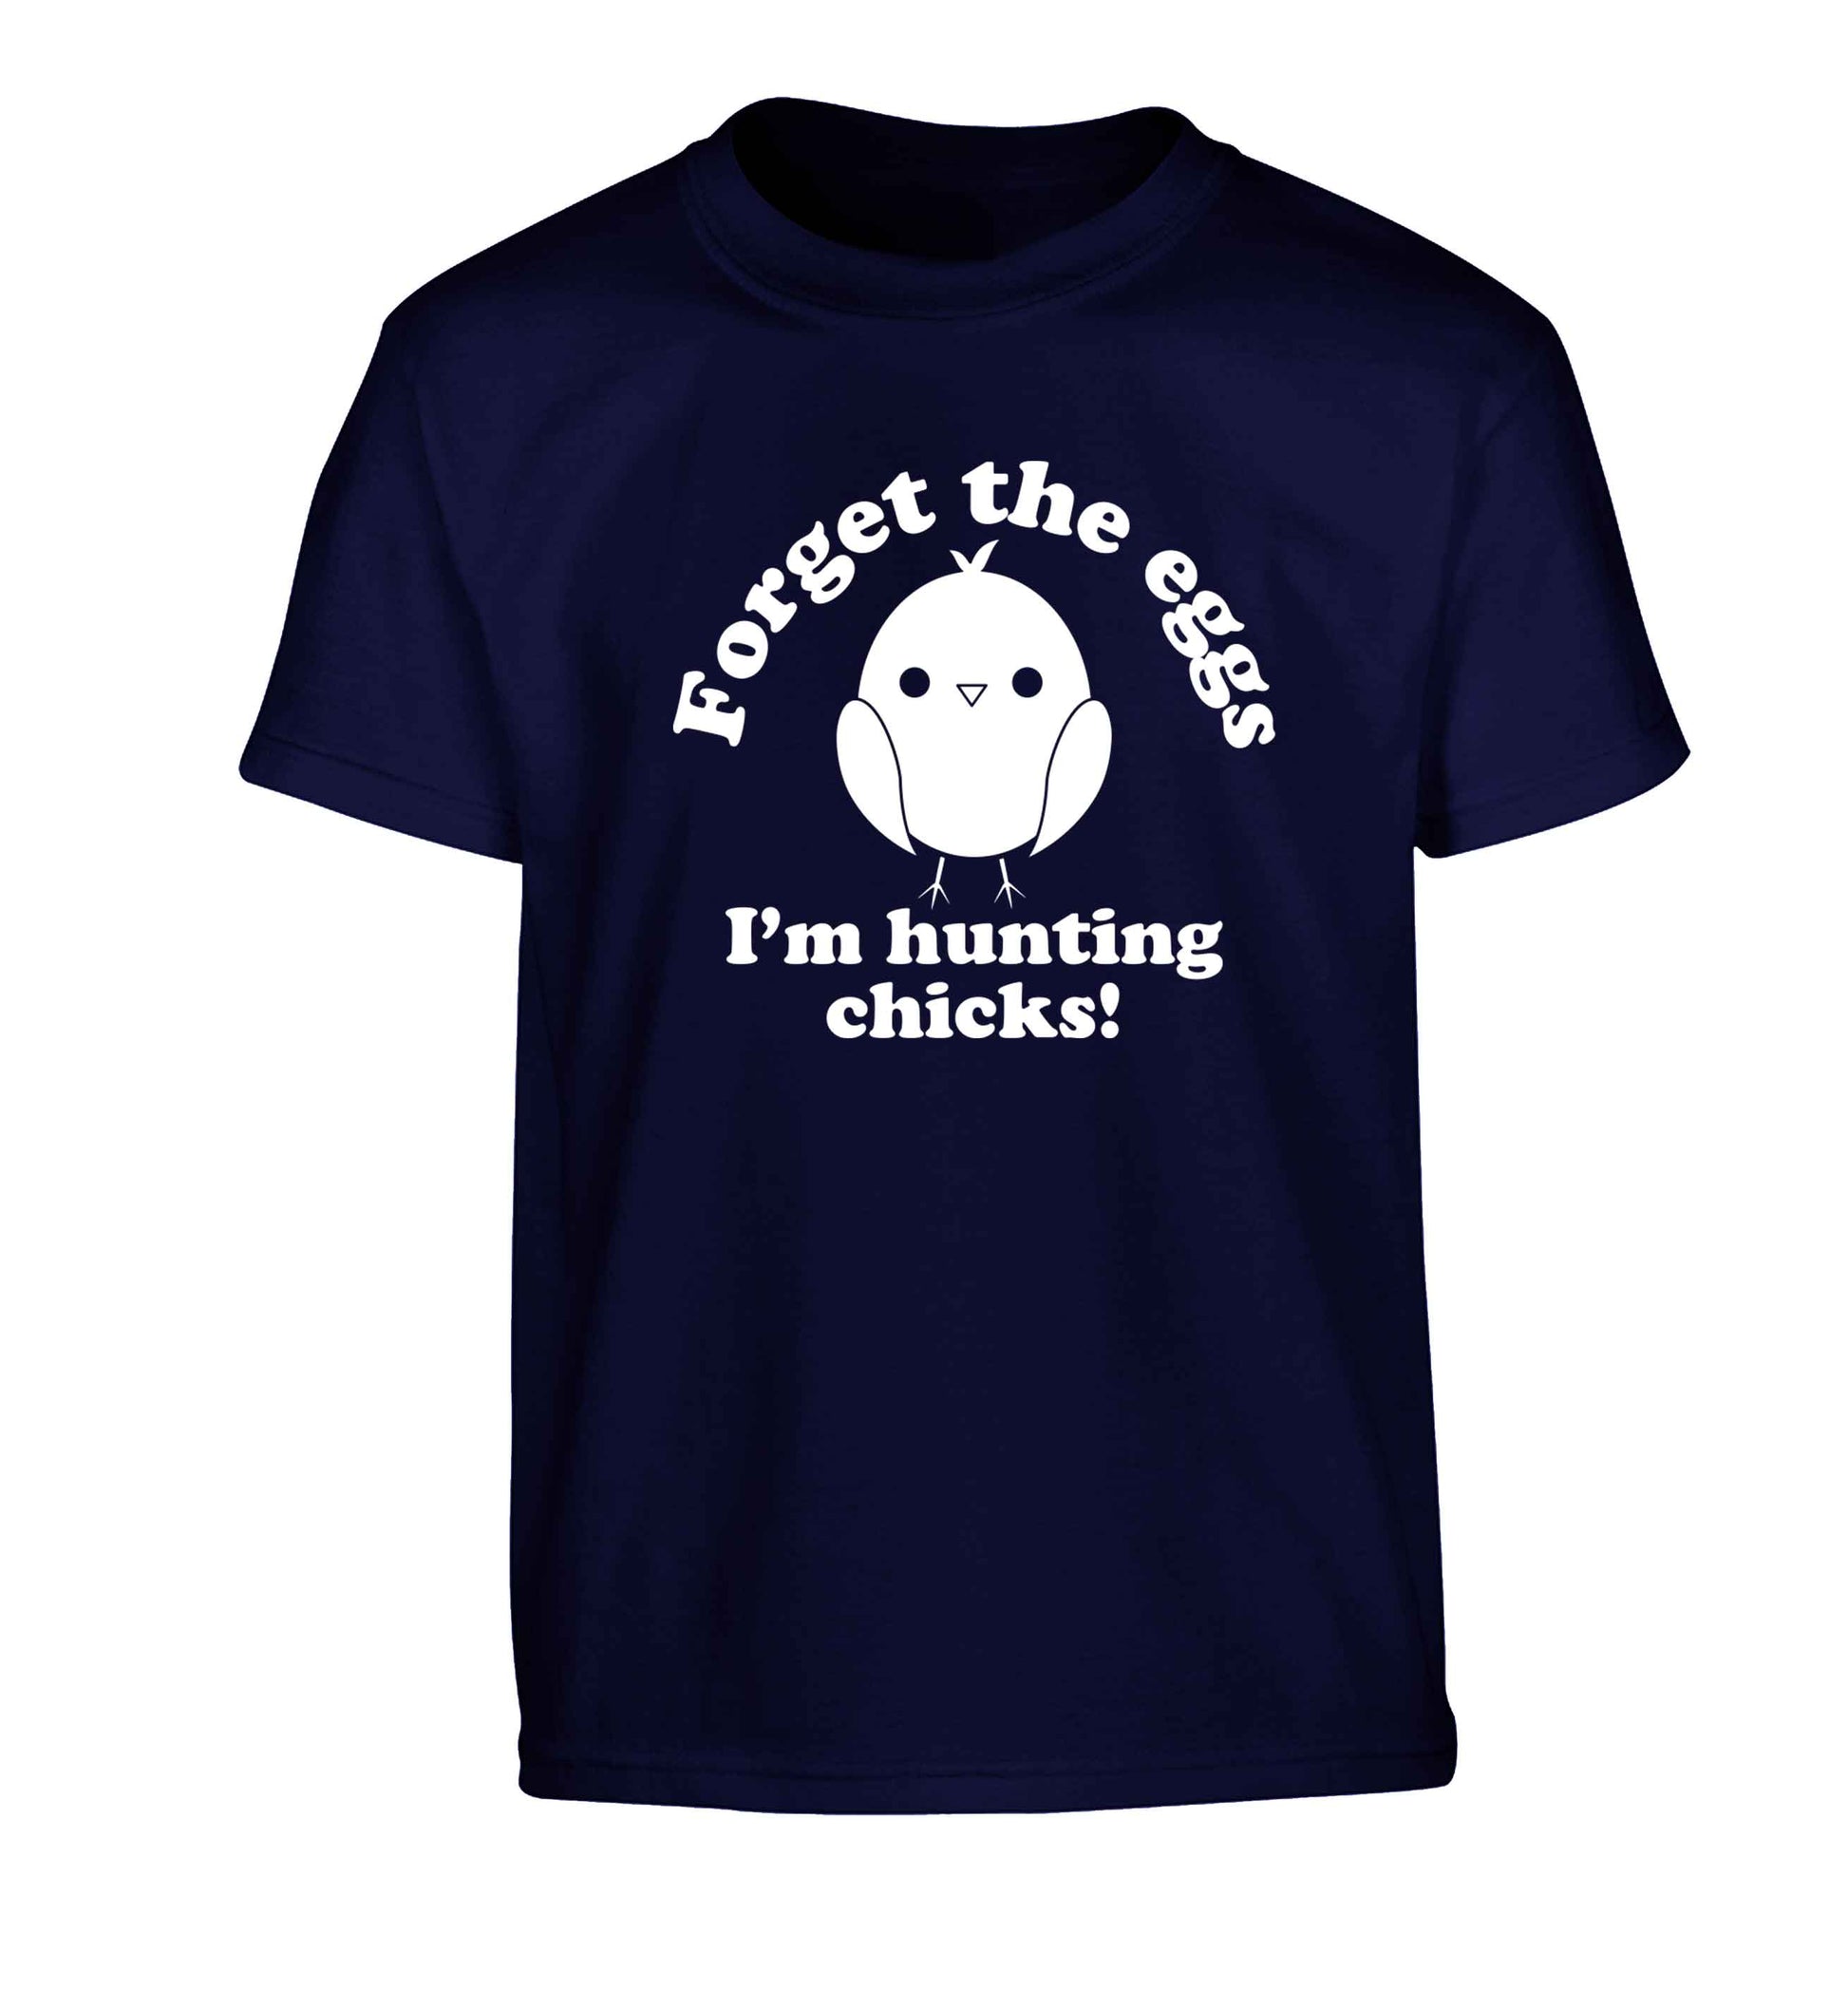 Forget the eggs I'm hunting chicks! Children's navy Tshirt 12-13 Years